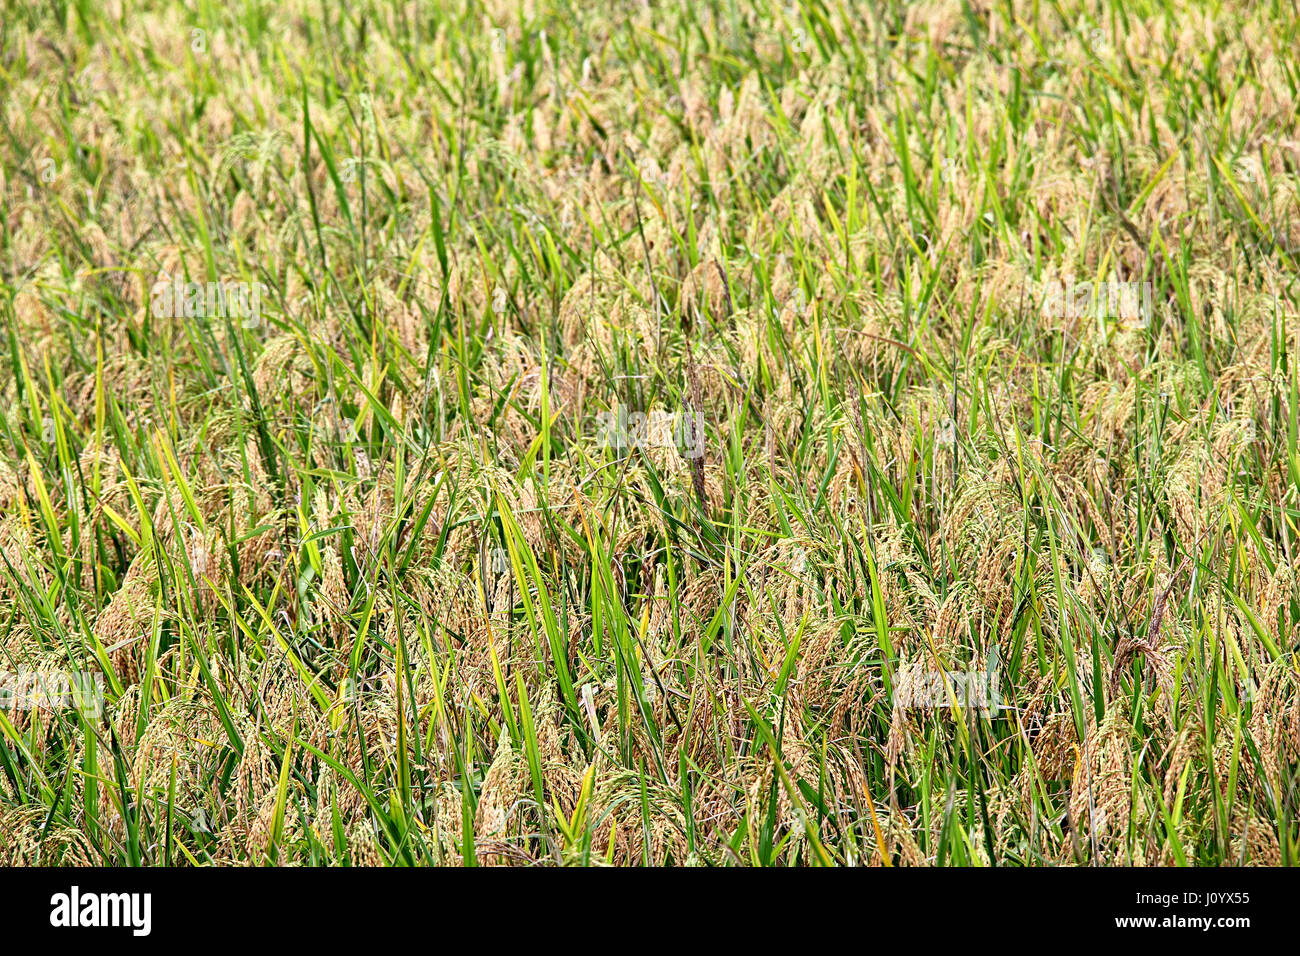 Rice paddy plants field with fully ripe rice stalks, ready to harvest, from Goa, India Stock Photo